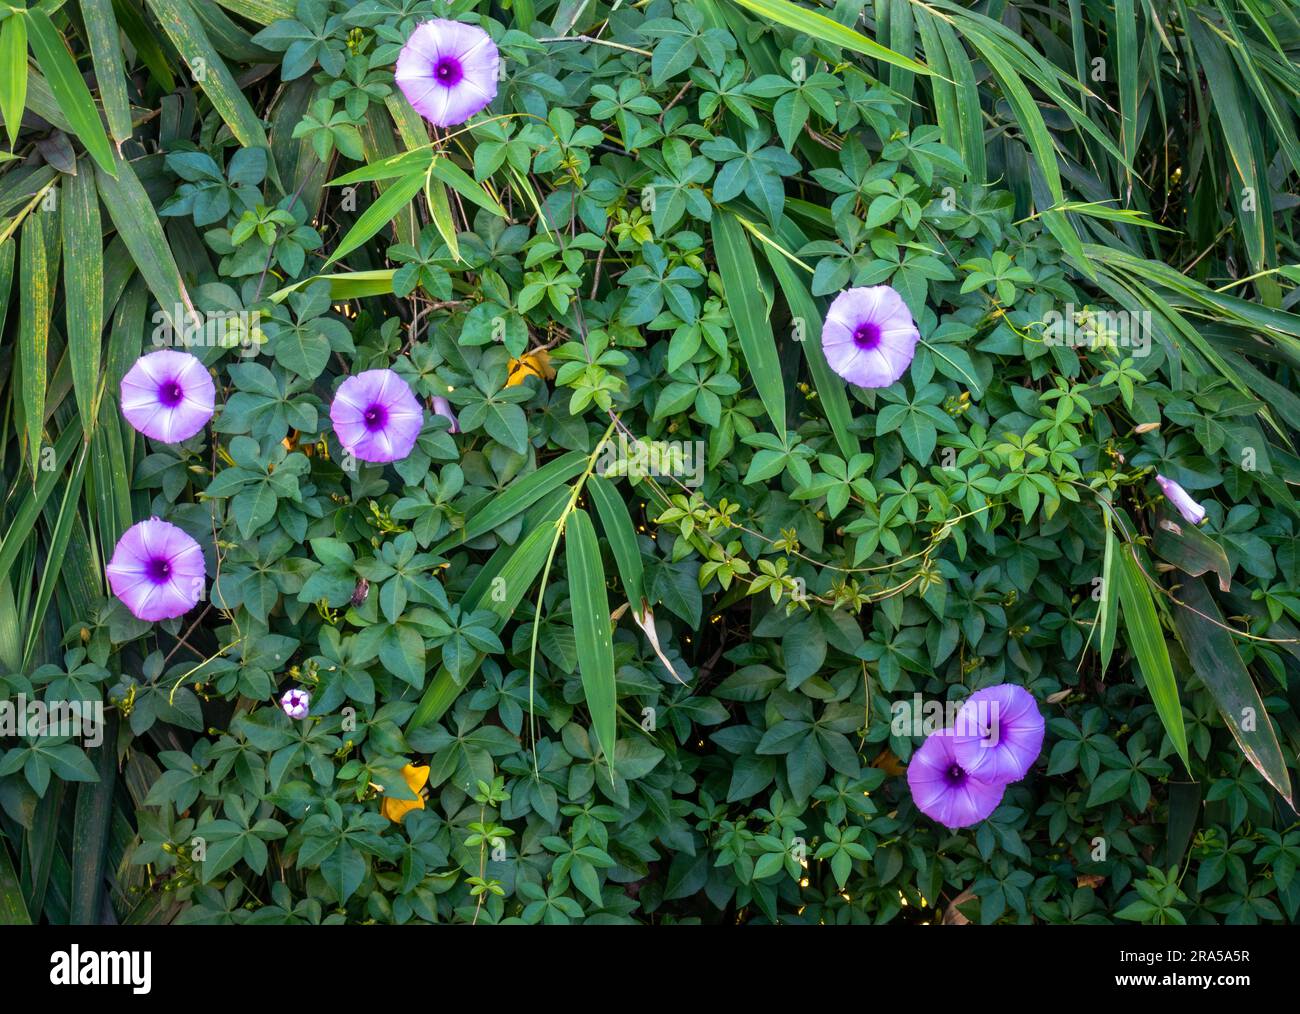 Ipomoea cairica, commonly known as the mile-a-minute vine or morning glory vine with purple flowers. Uttarakhand India. Stock Photo